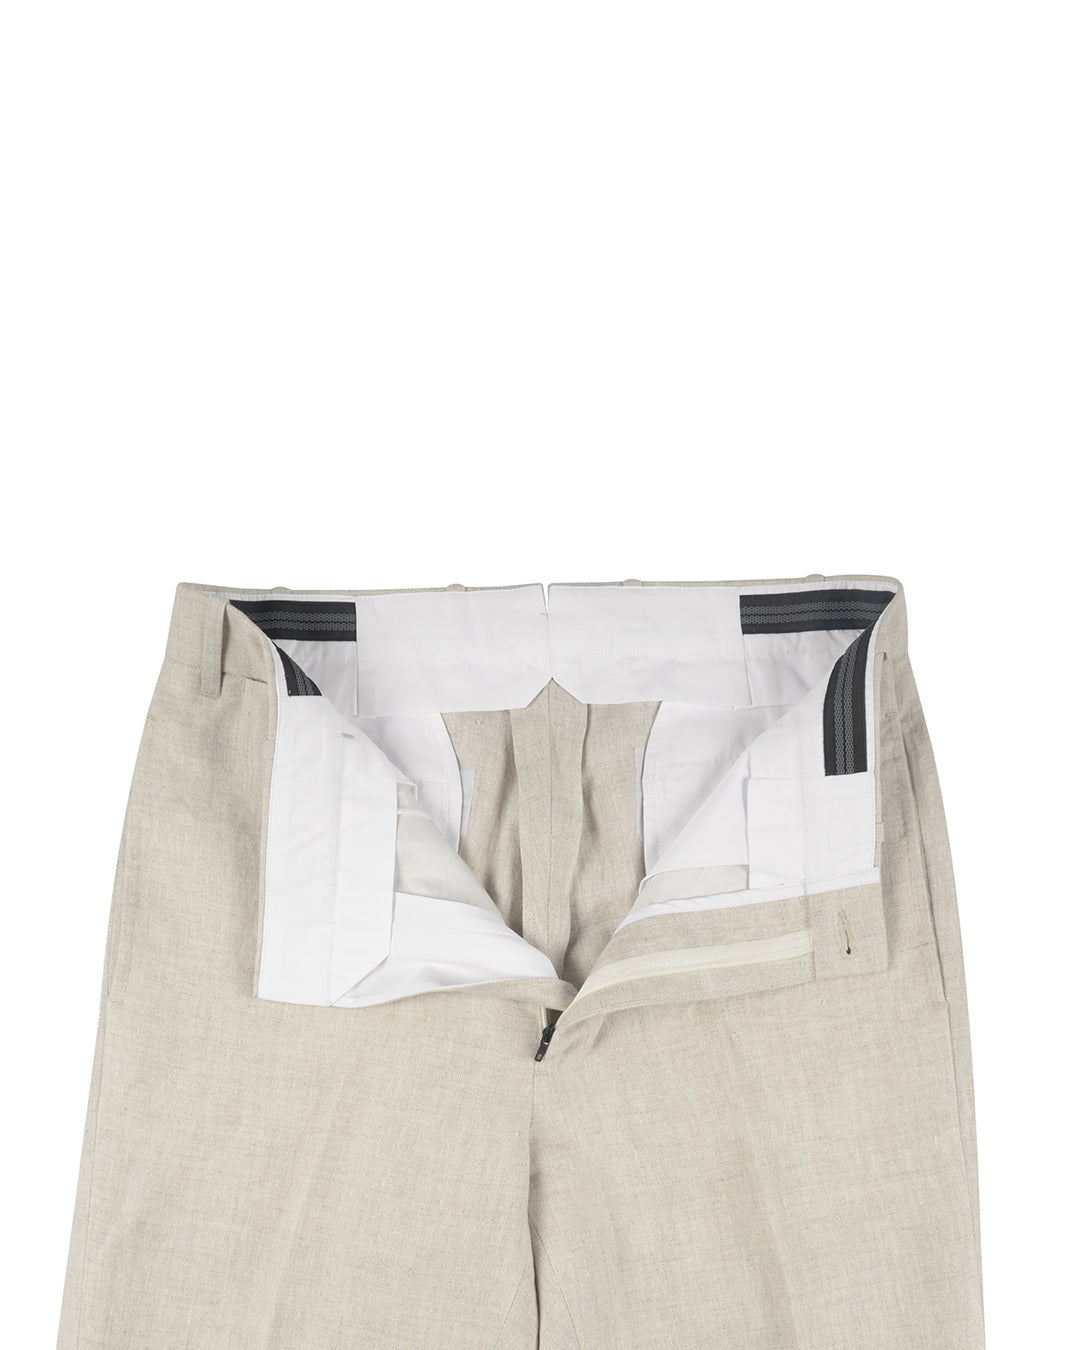 Front open view of custom linen suiting pants for men by Luxire in muslin